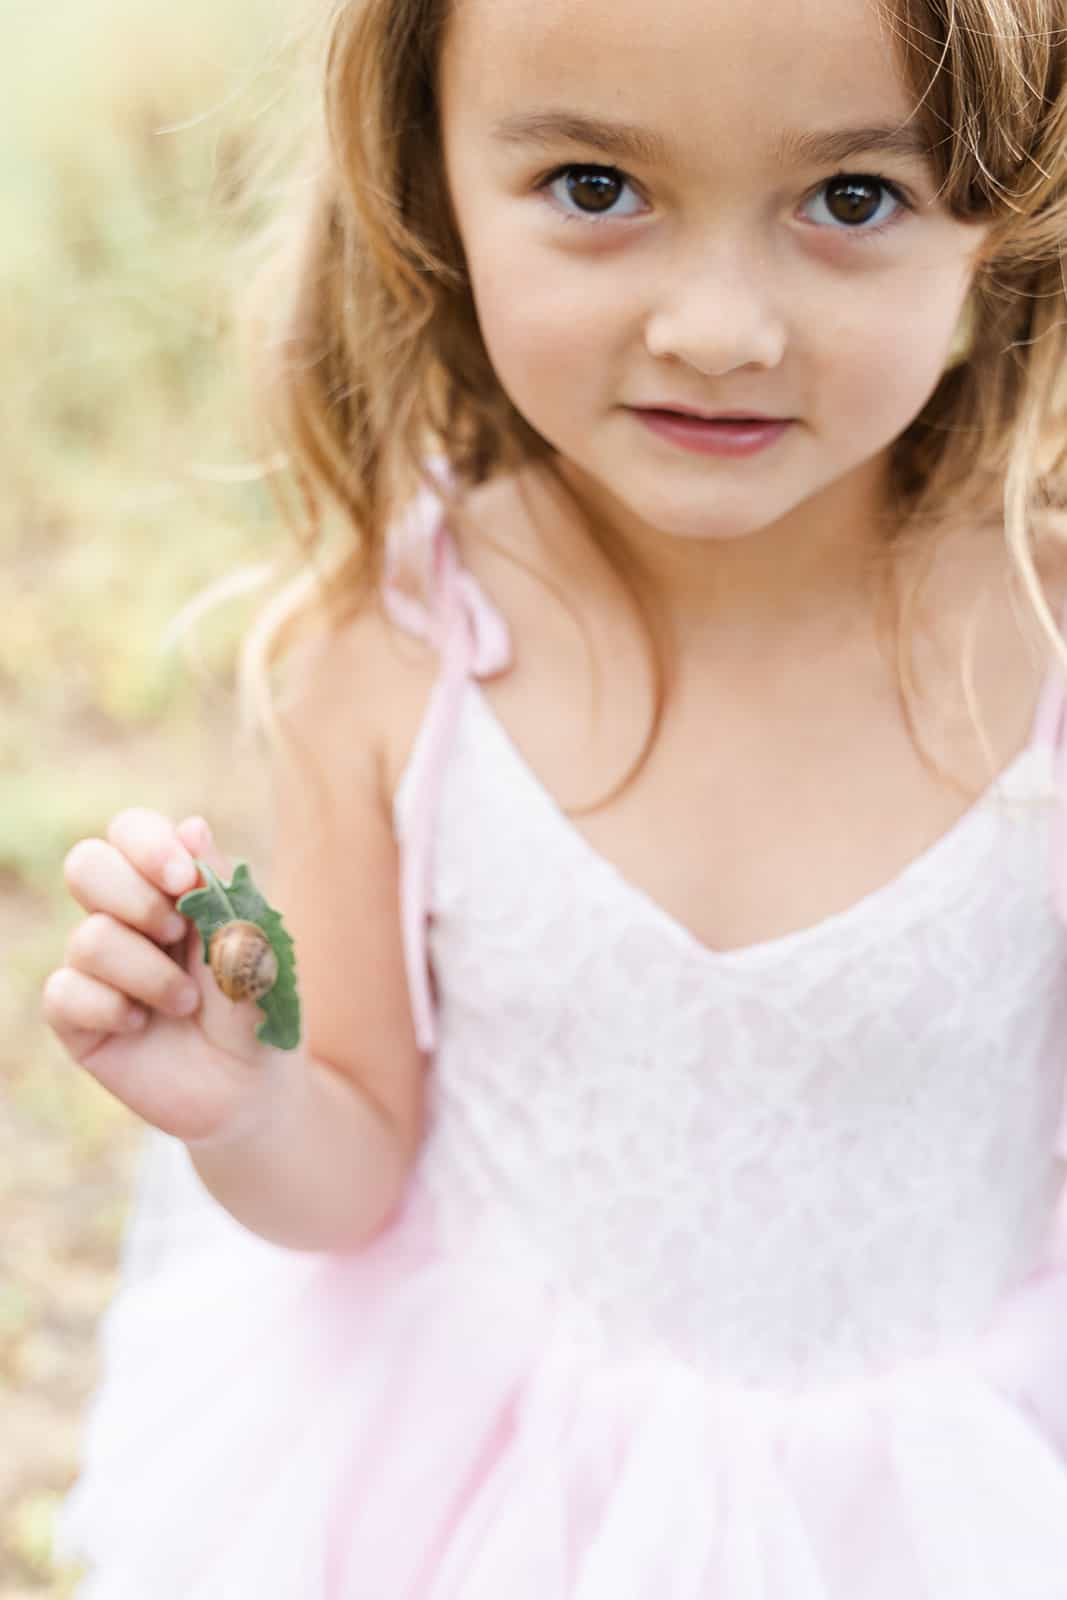 A young girl plays with a snail on a leaf while wearing a pink dress